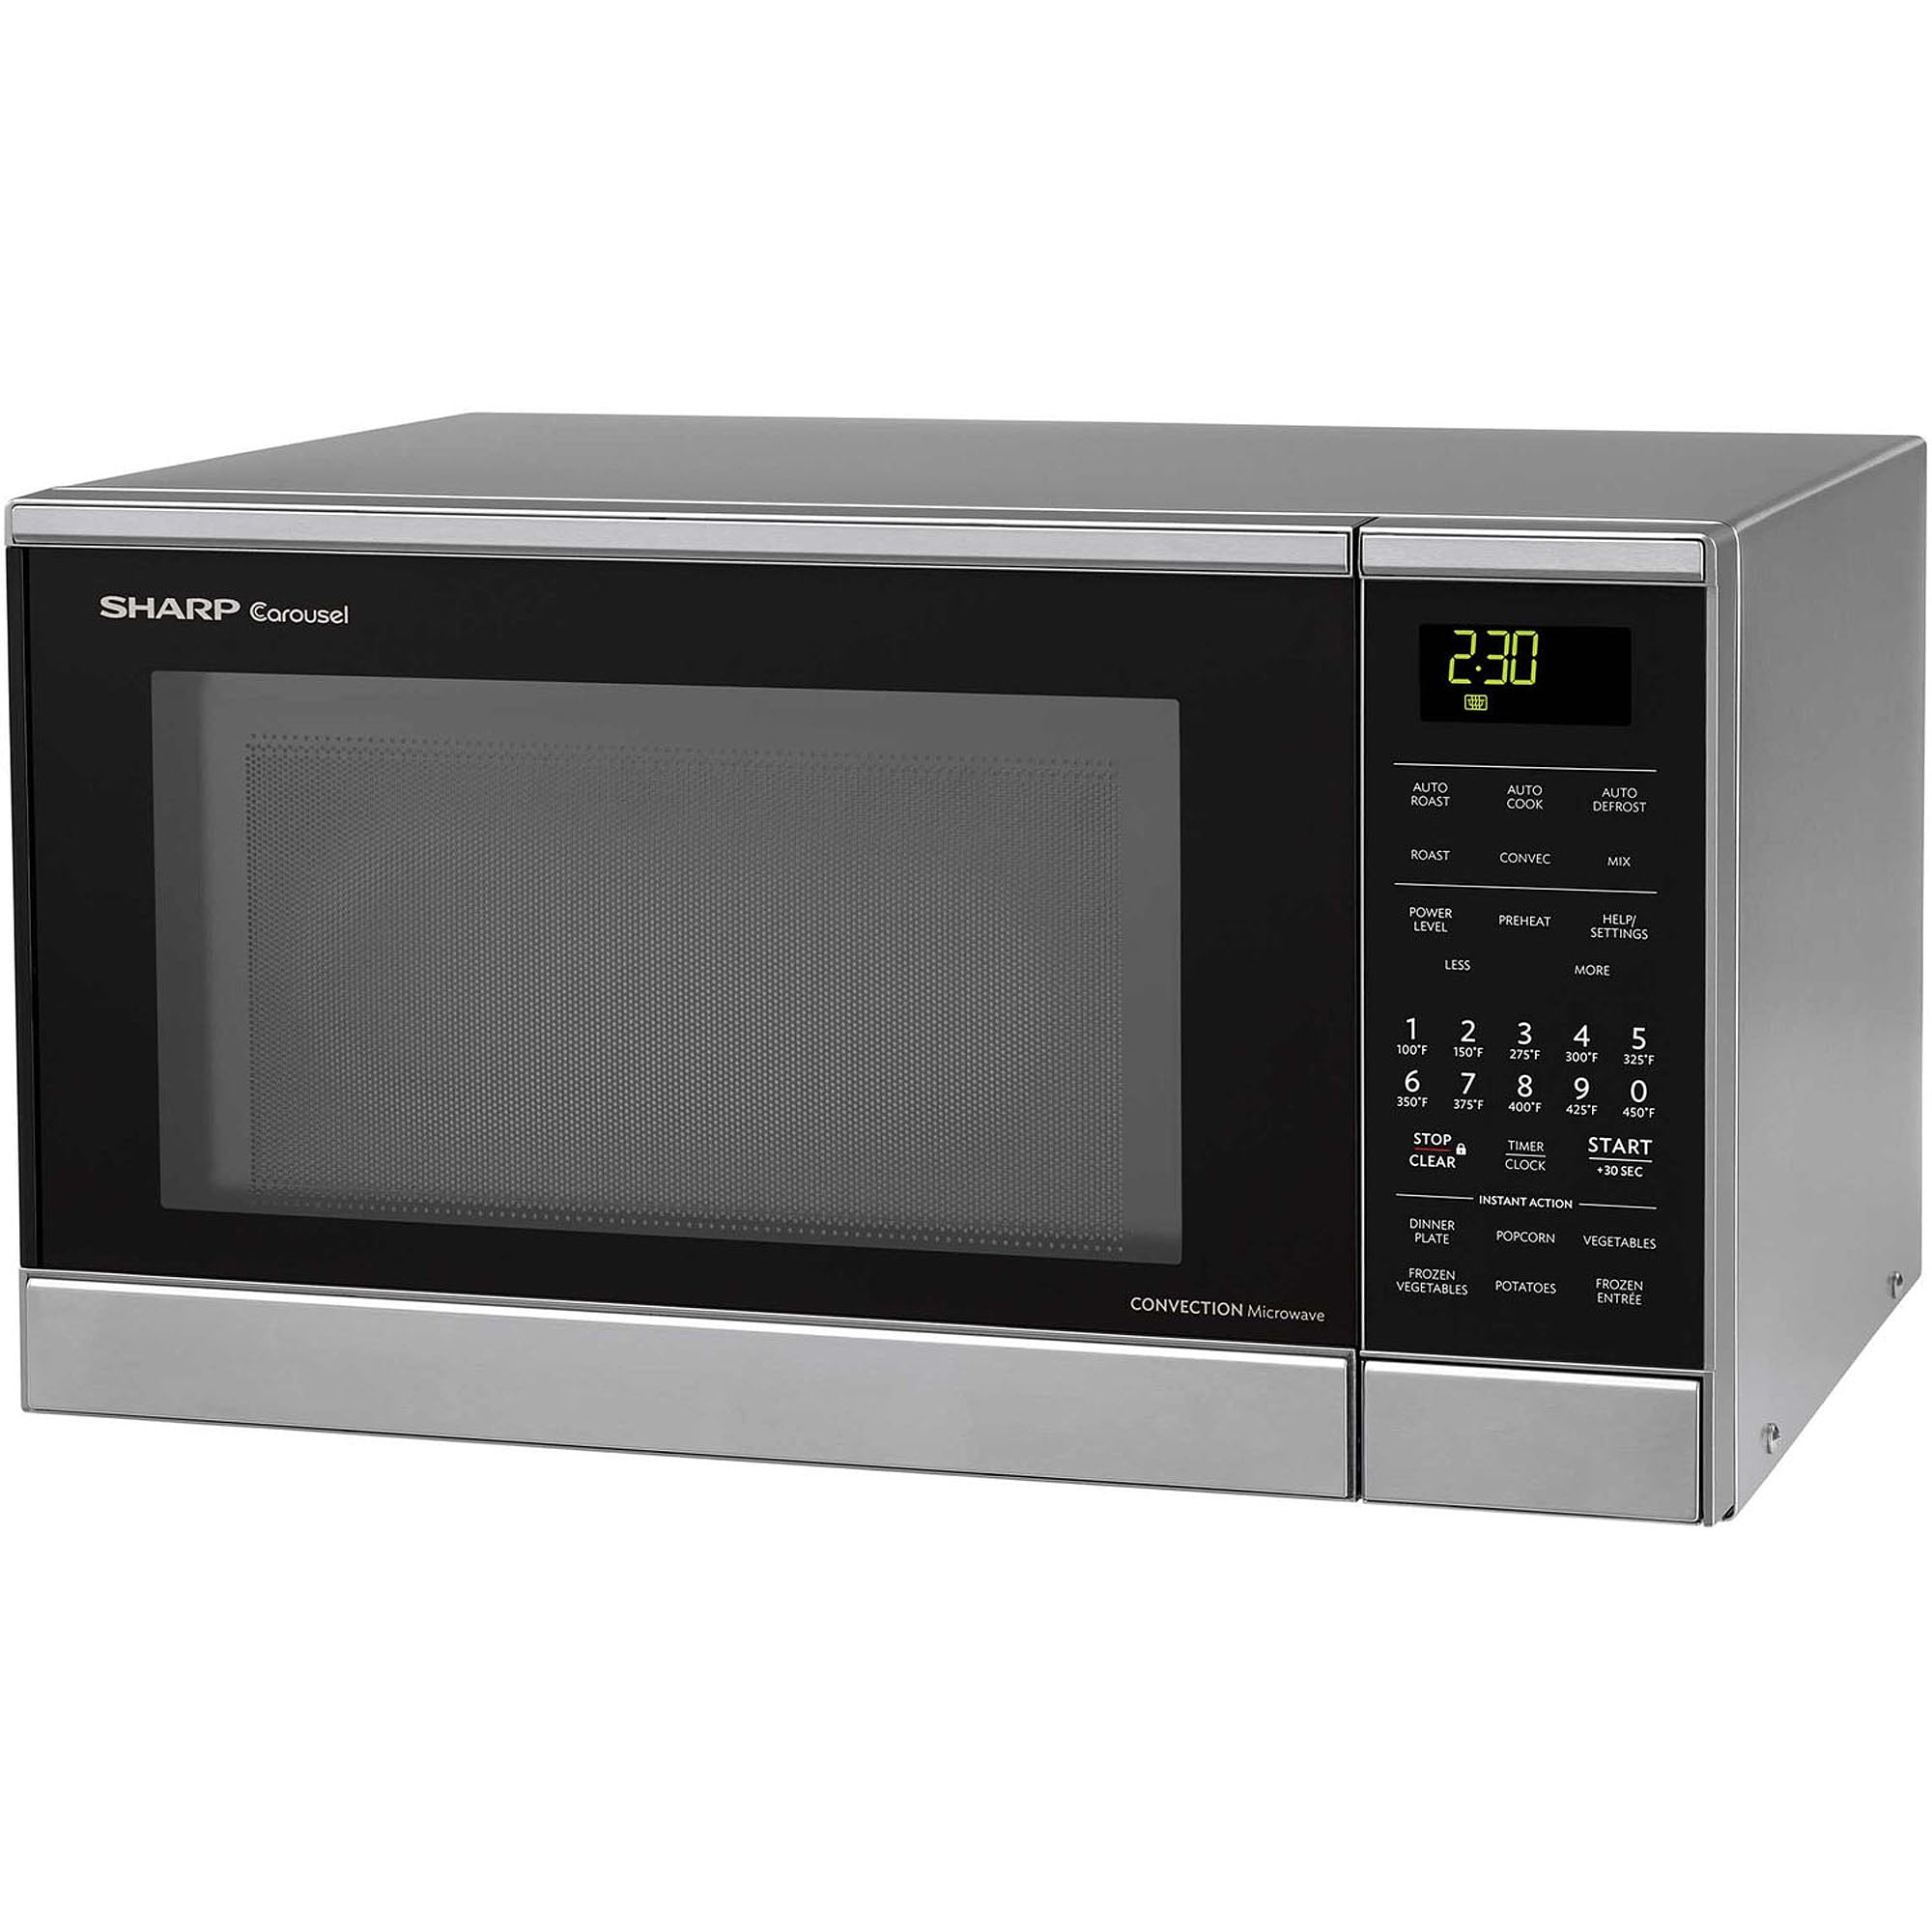 Sharp Carousel 0 9 Cu Ft 900w Countertop Convection Microwave